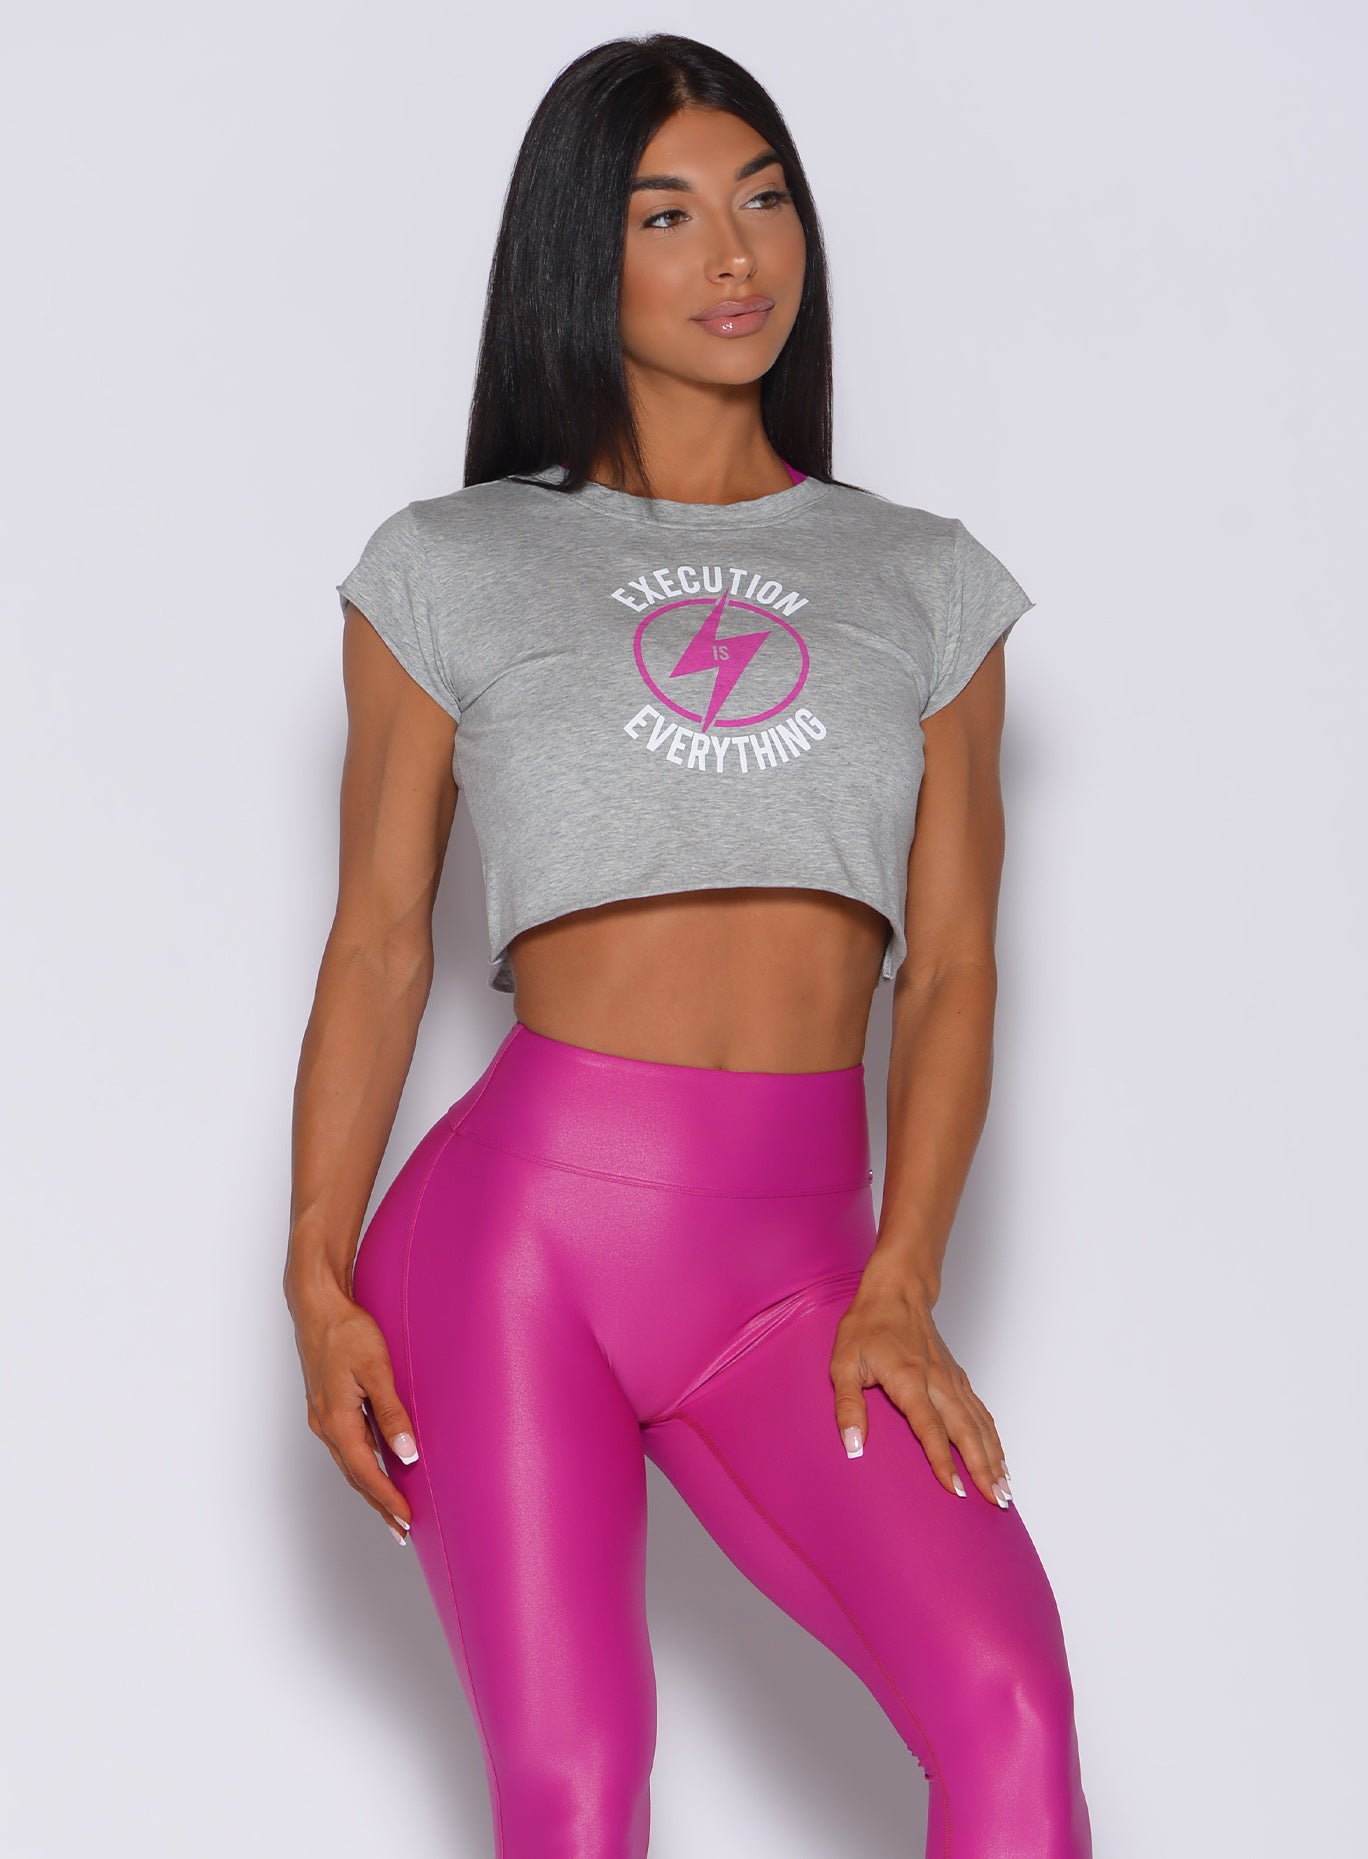 Front profile view of a model in our execution tee in heather gray color and a pink gloss leggings